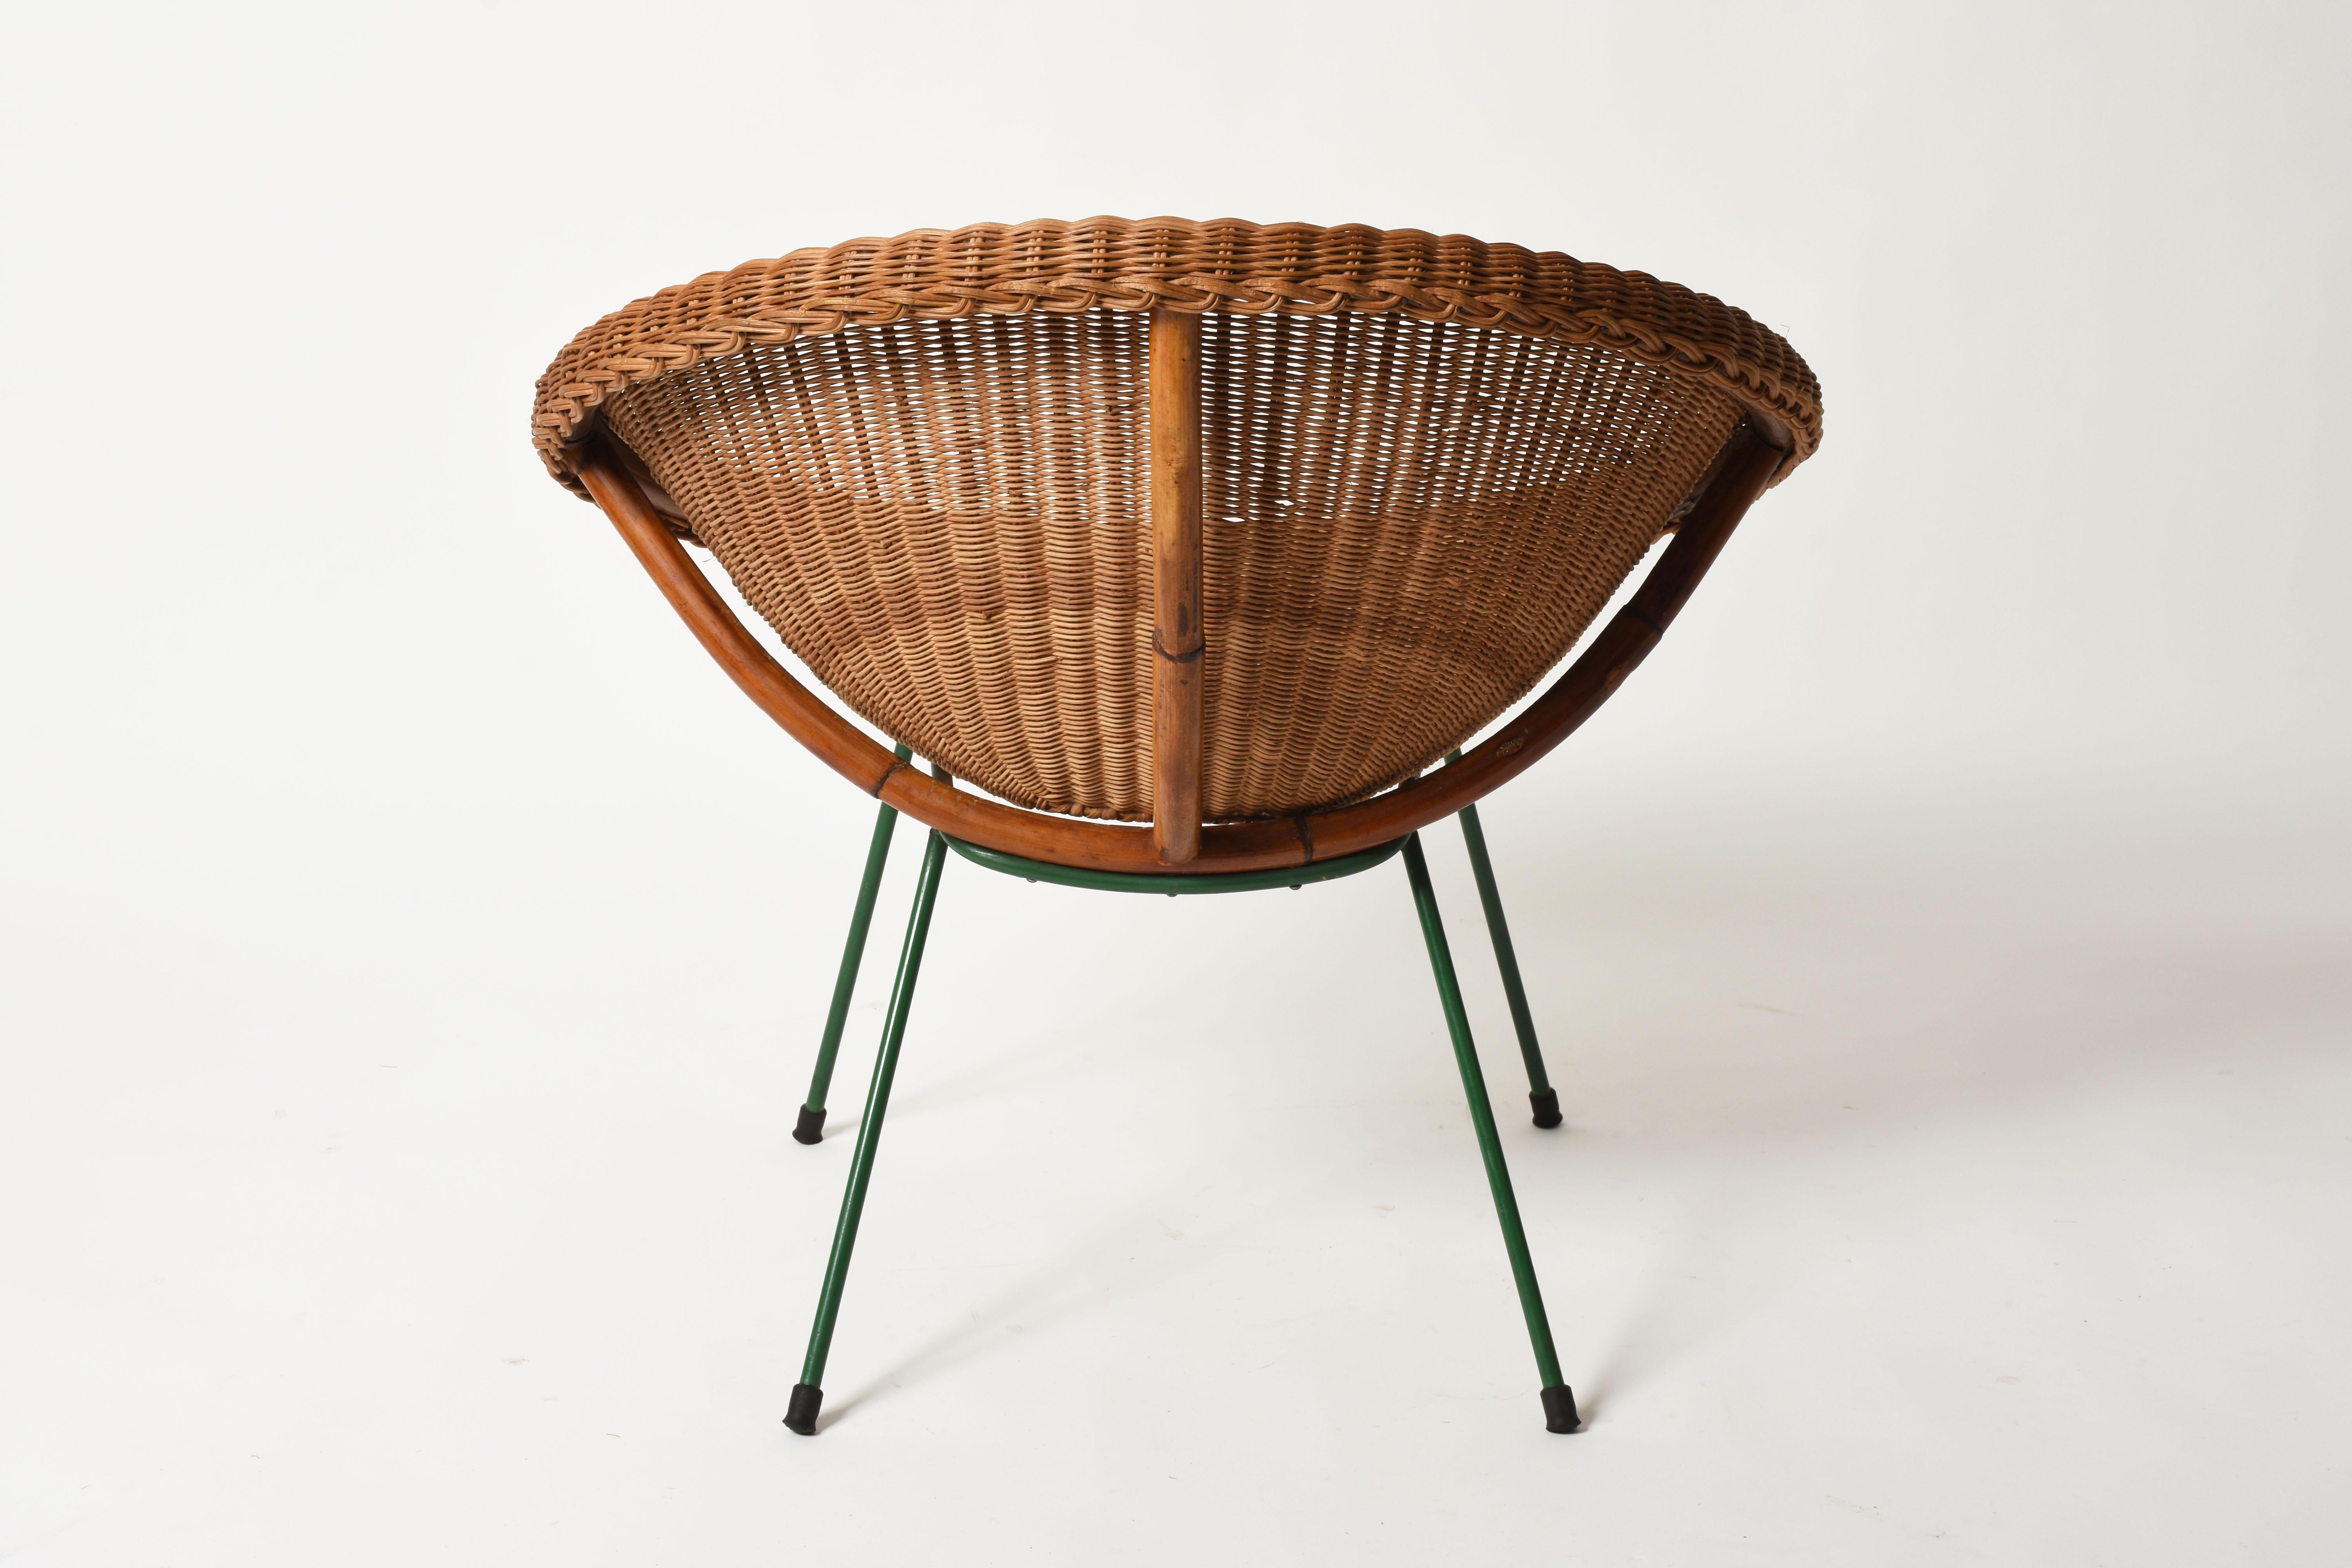 Lacquered Midcentury Italian Rattan and Bamboo Shell Armchair with Green Metal Legs, 1950s